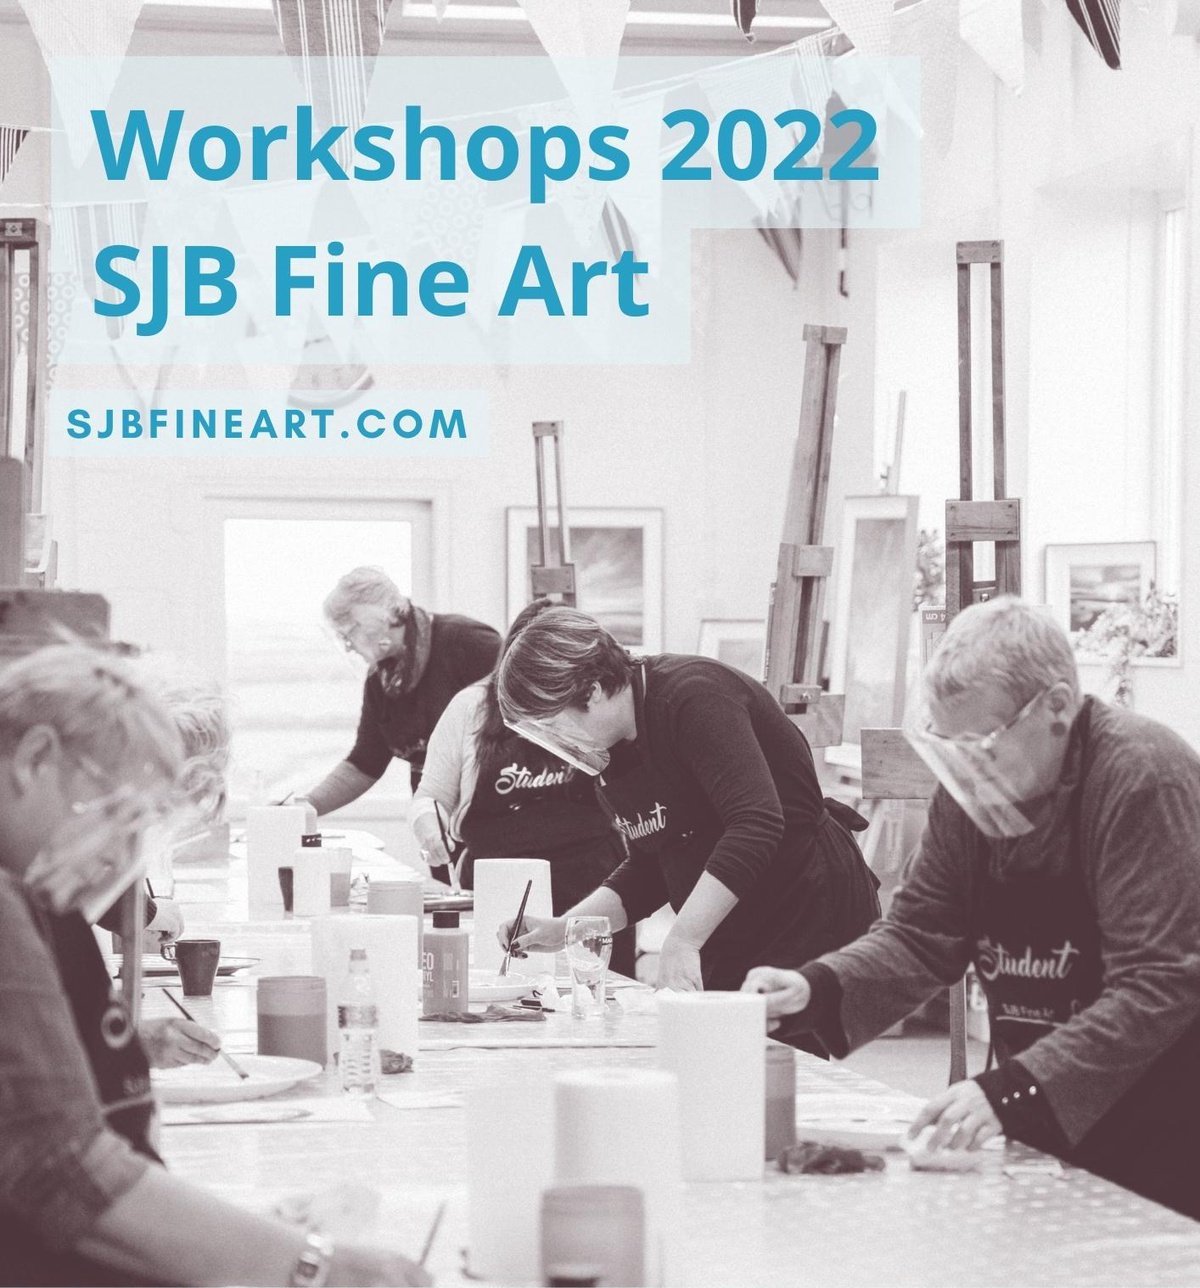 New workshops and classes dates for 2022